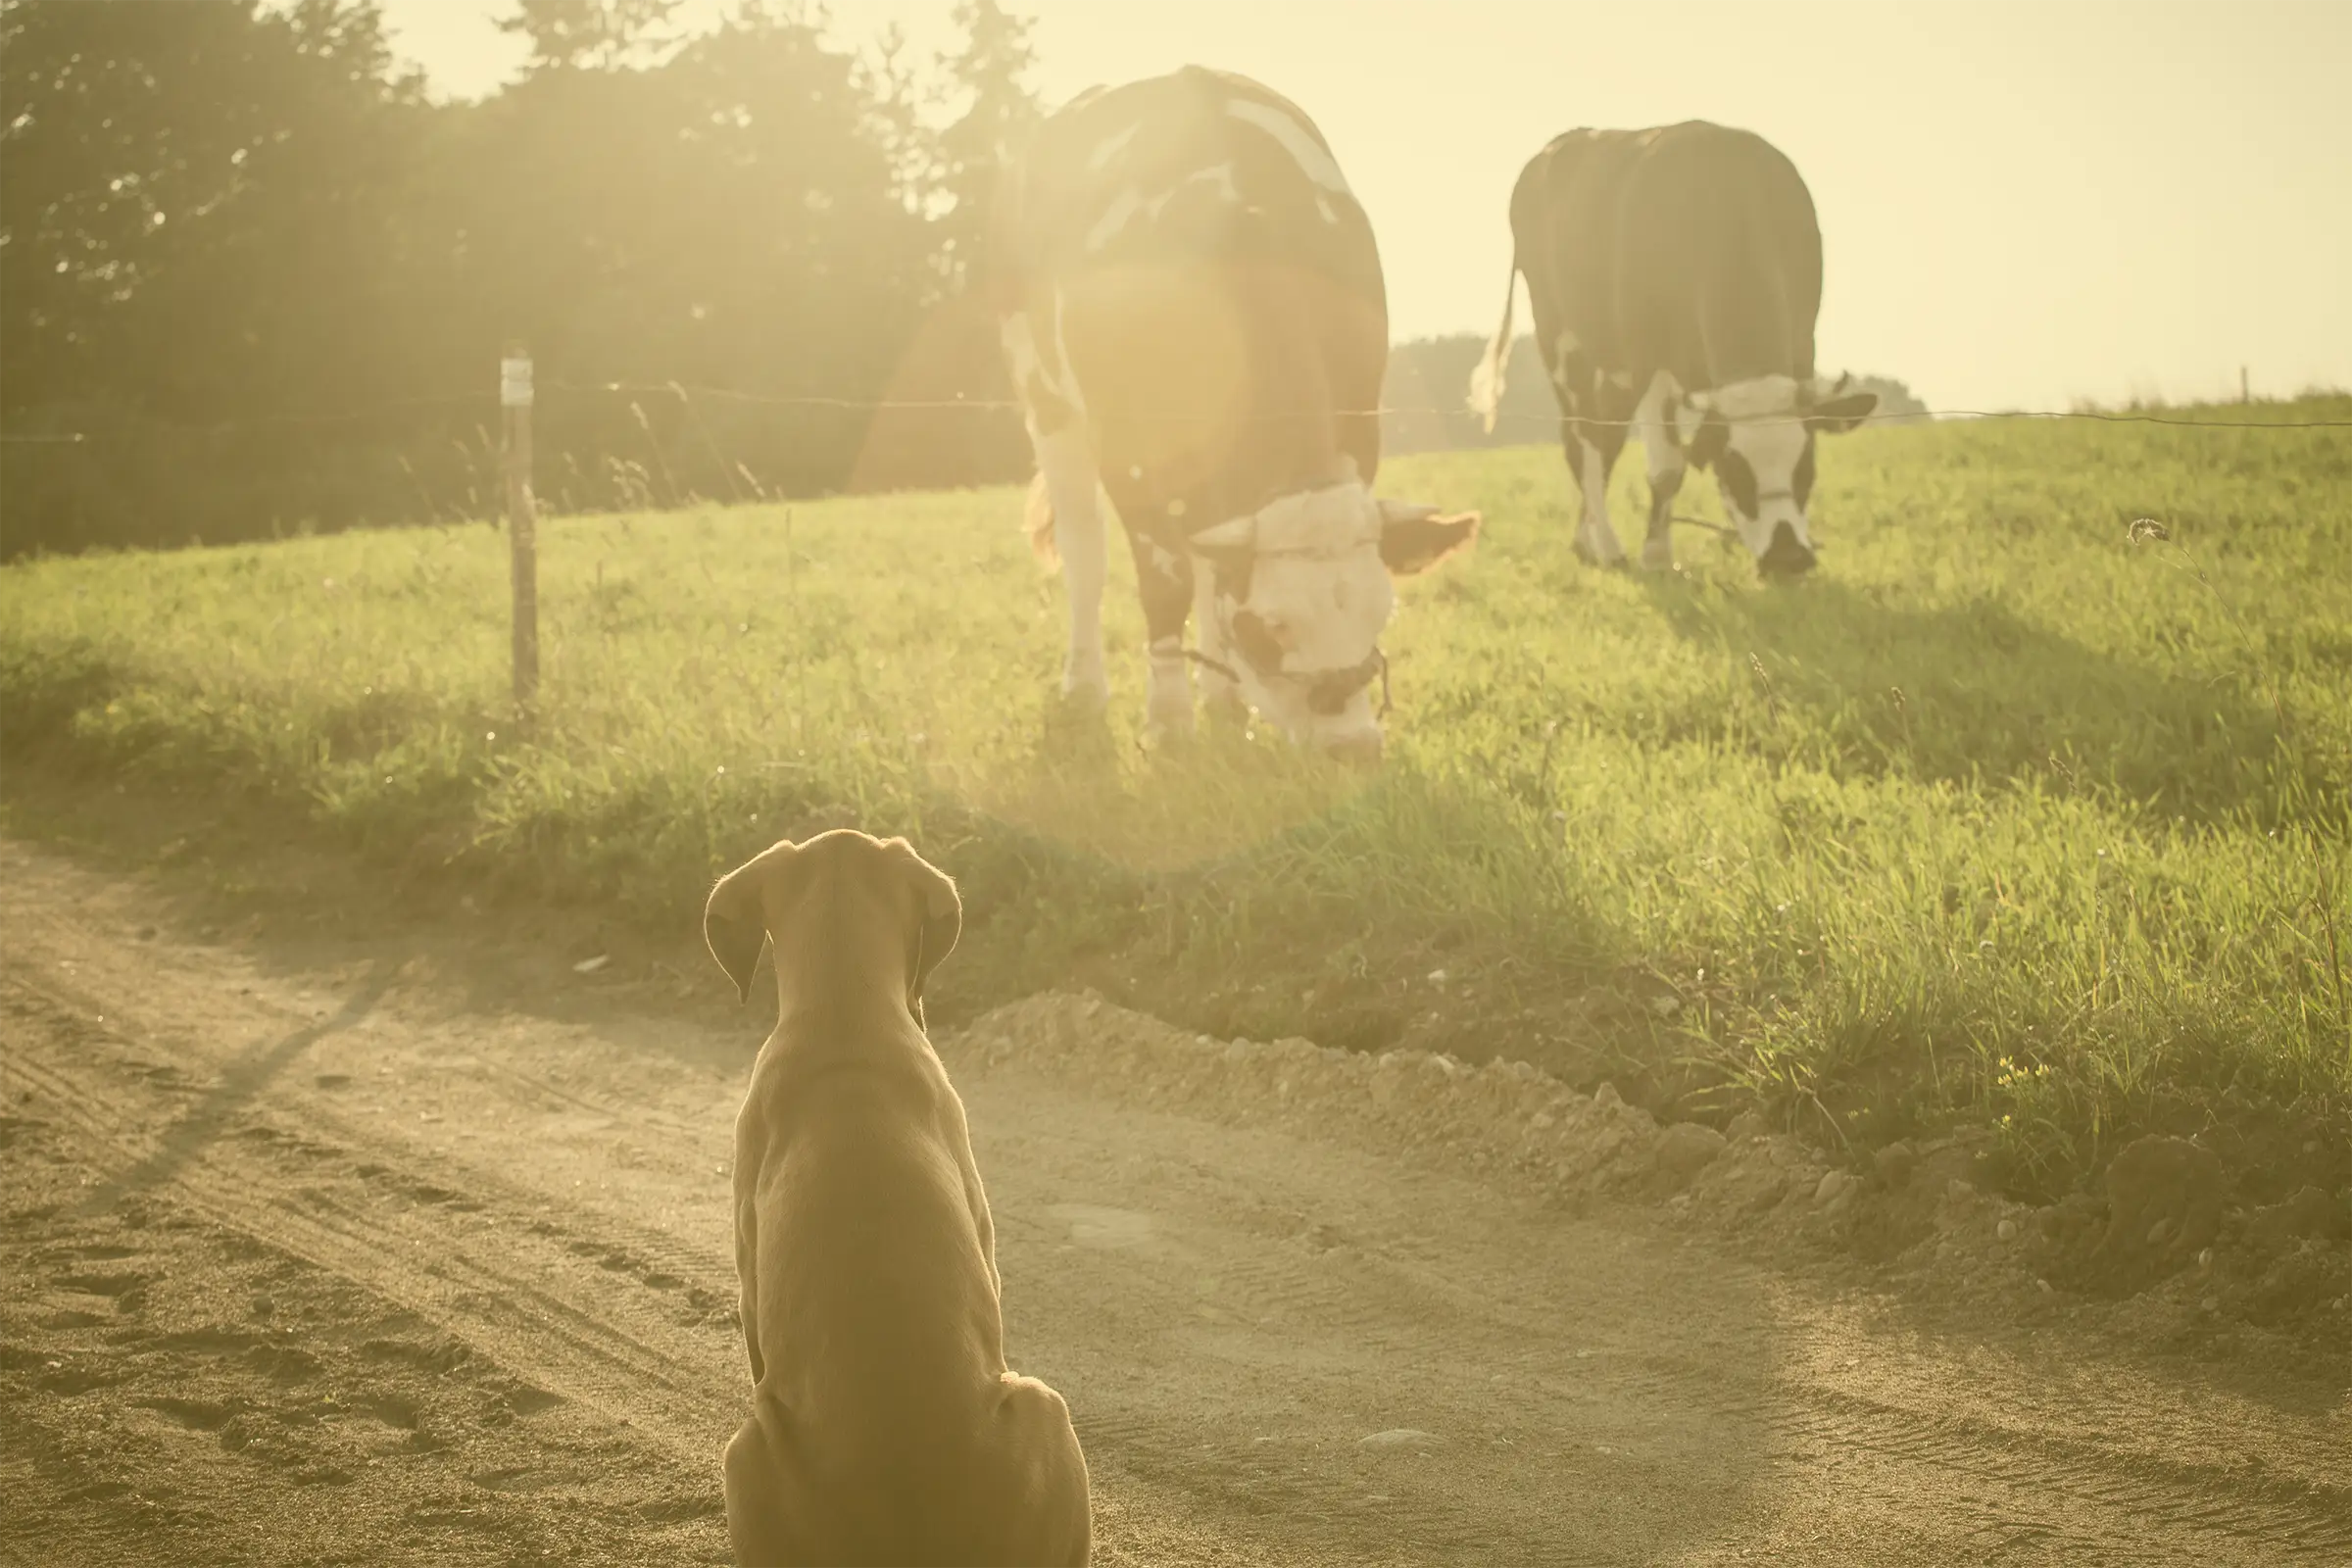 Dog sitting in dirt road watching cows graze on a green field